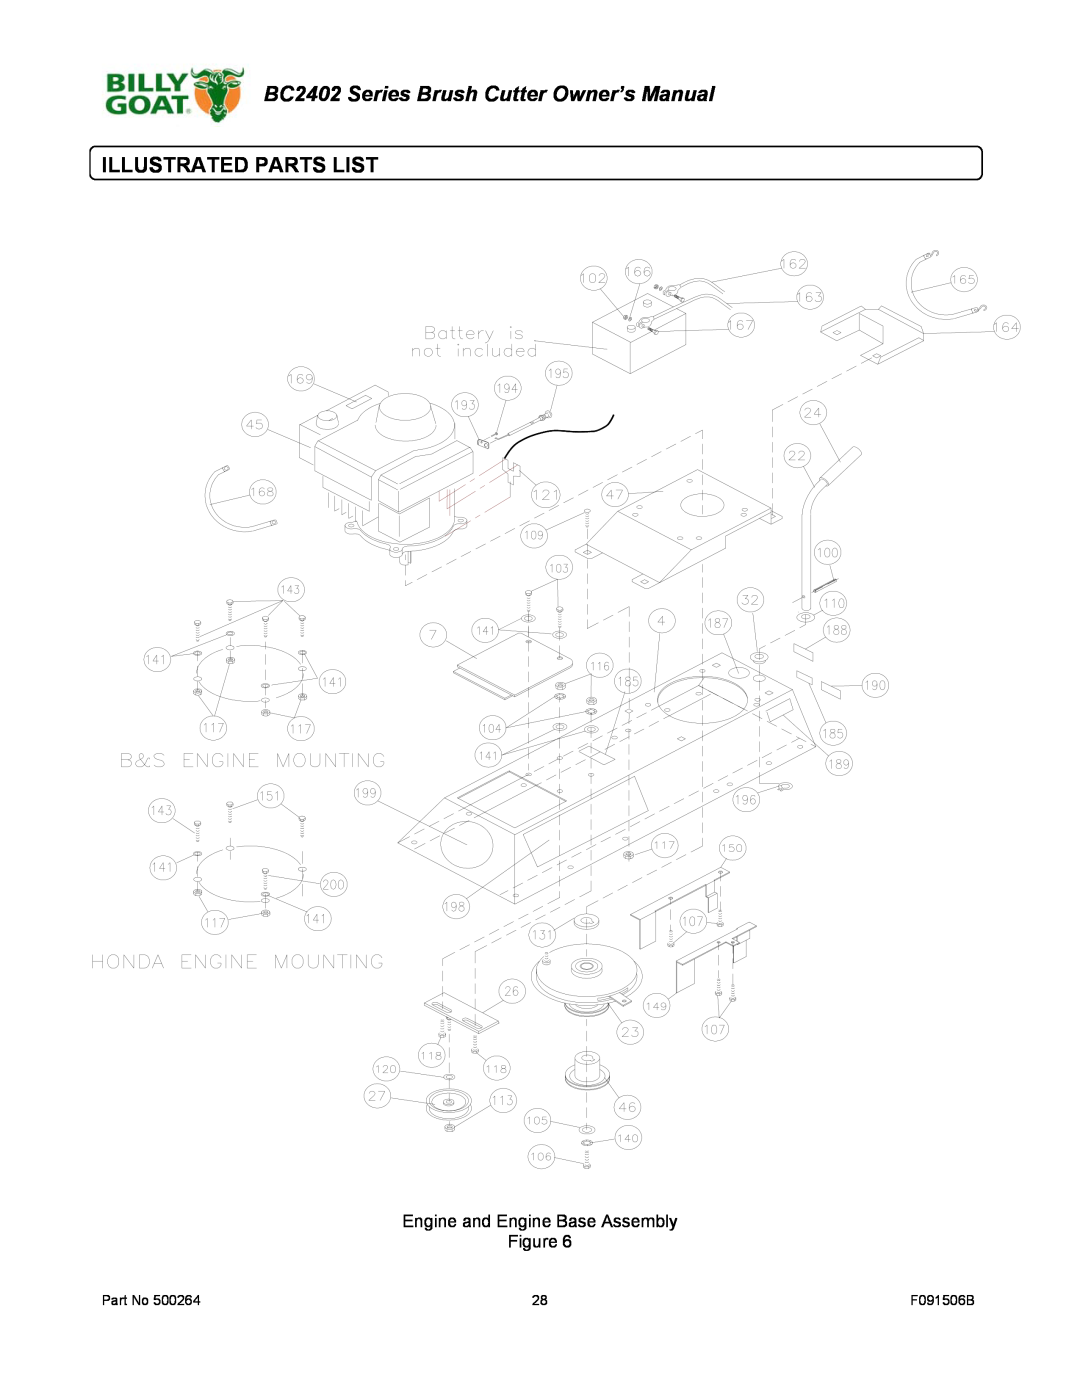 Billy Goat BC2402 owner manual Illustrated Parts List, Engine and Engine Base Assembly 